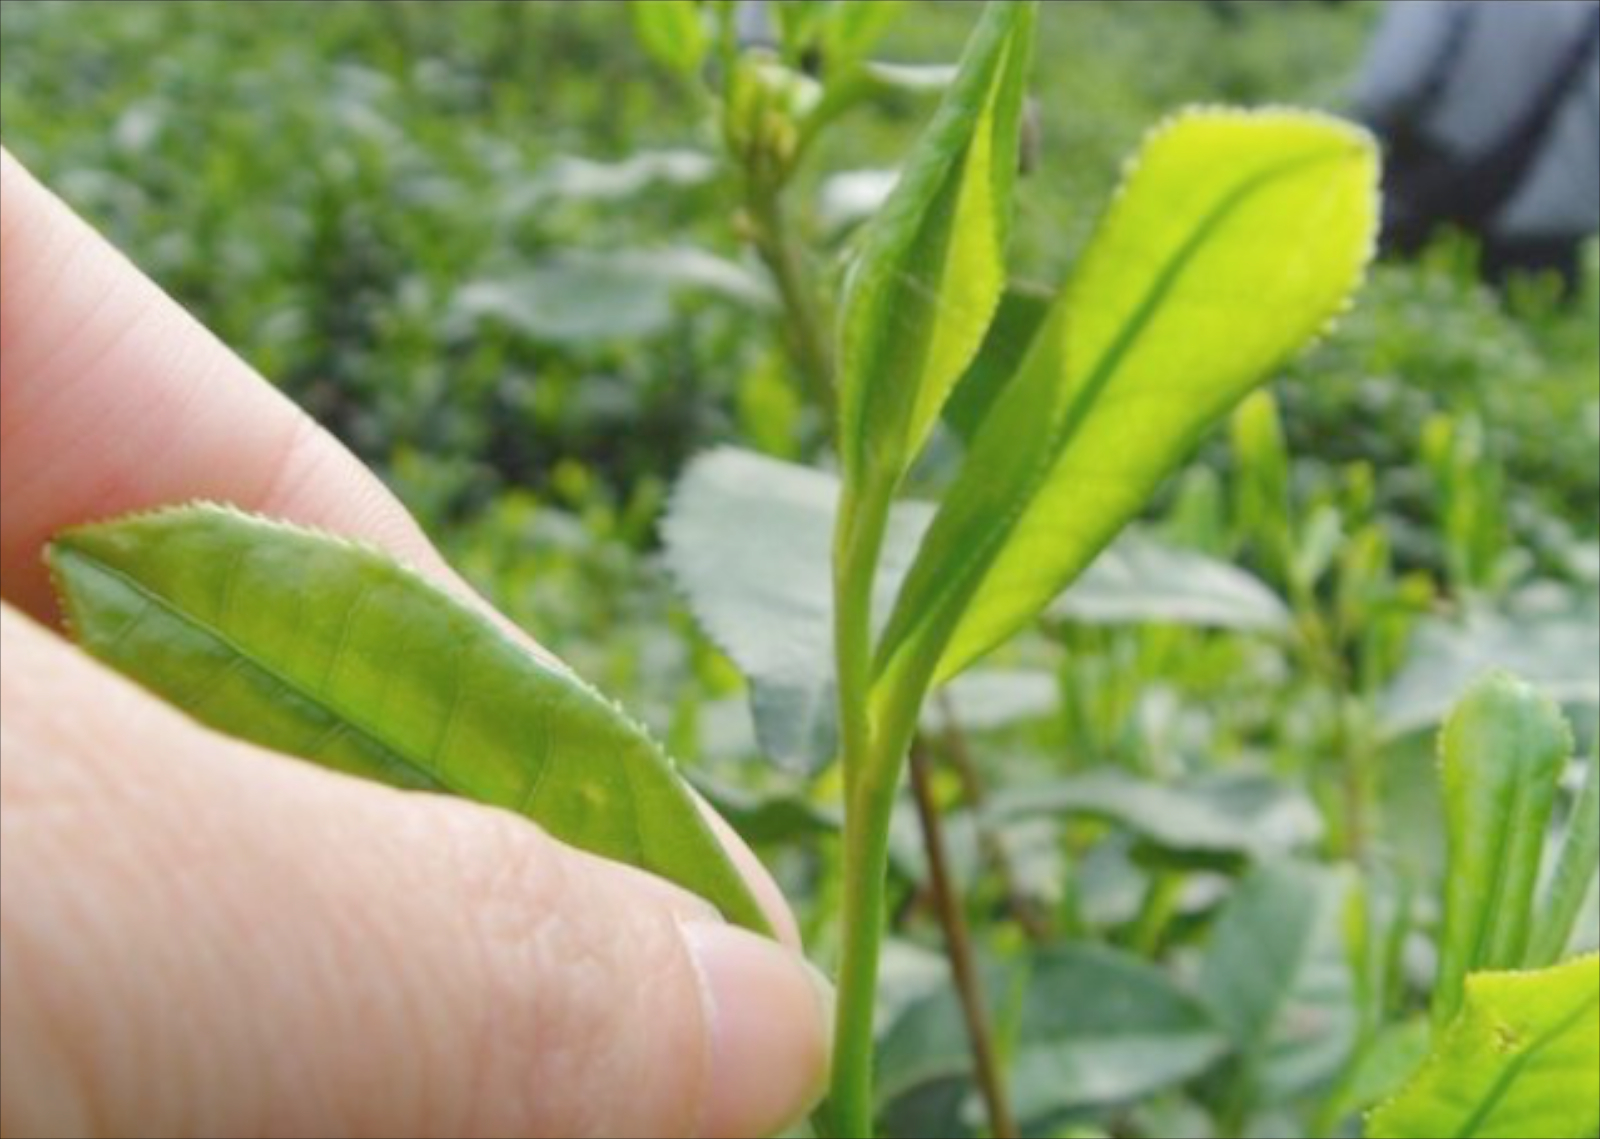 Picking Standard for Liu An Gua Pian. The second opened leaf is picked as soon as it matures to the size of a pickers thumb